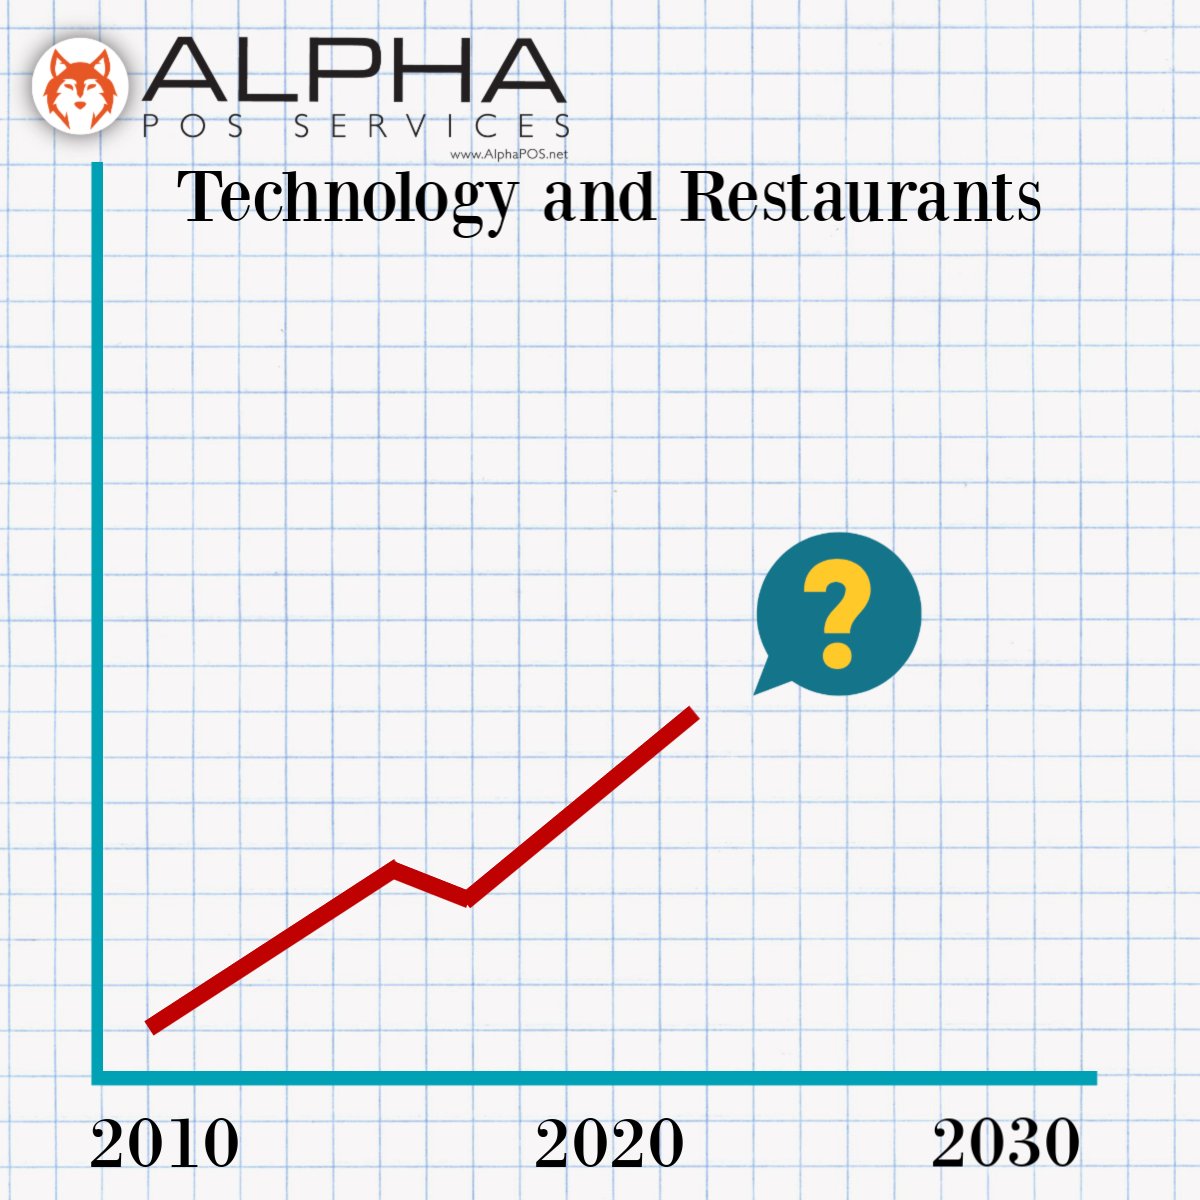 How has your restaurant experience changed in the last ten years? What’s in store for us in the next ten? Our upcoming blog tackles this topic! #trendsandpredictions #restaurantlife #alphapos #focuspos